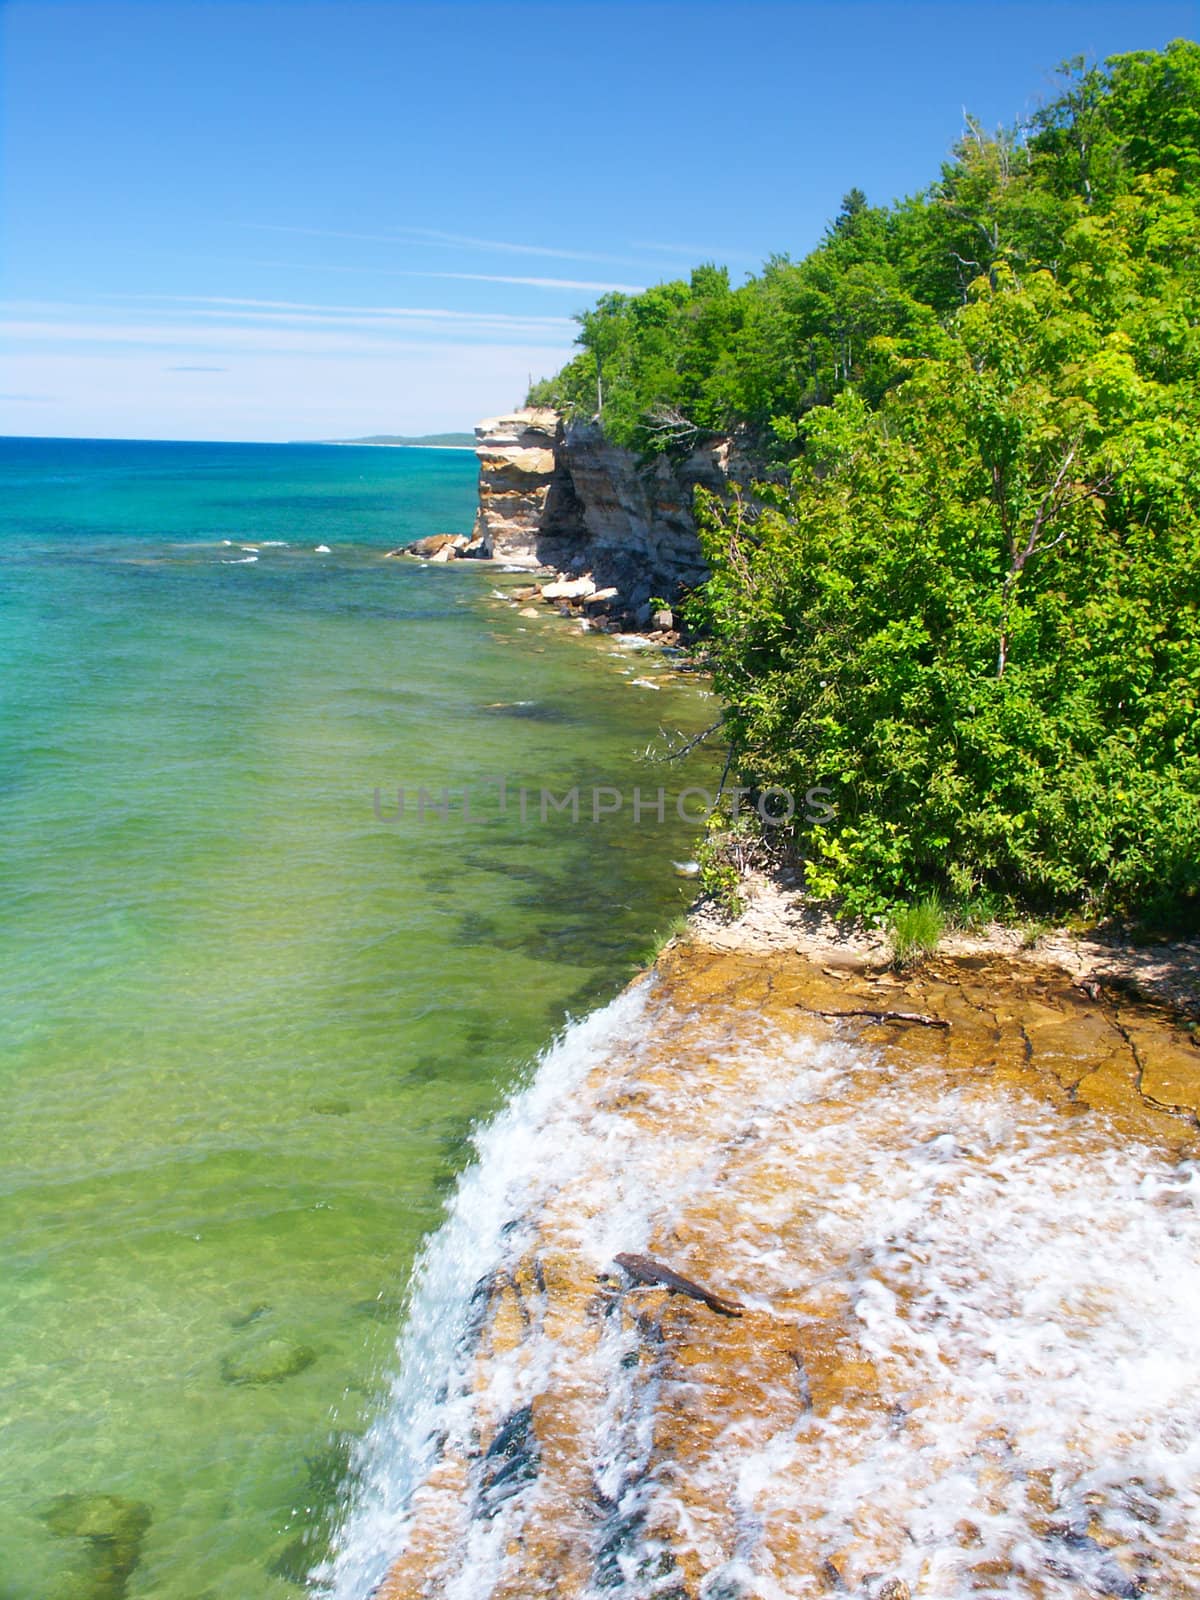 View of Lake Superior from the top of Spray Falls - Pictured Rocks National Lakeshore, Michigan.